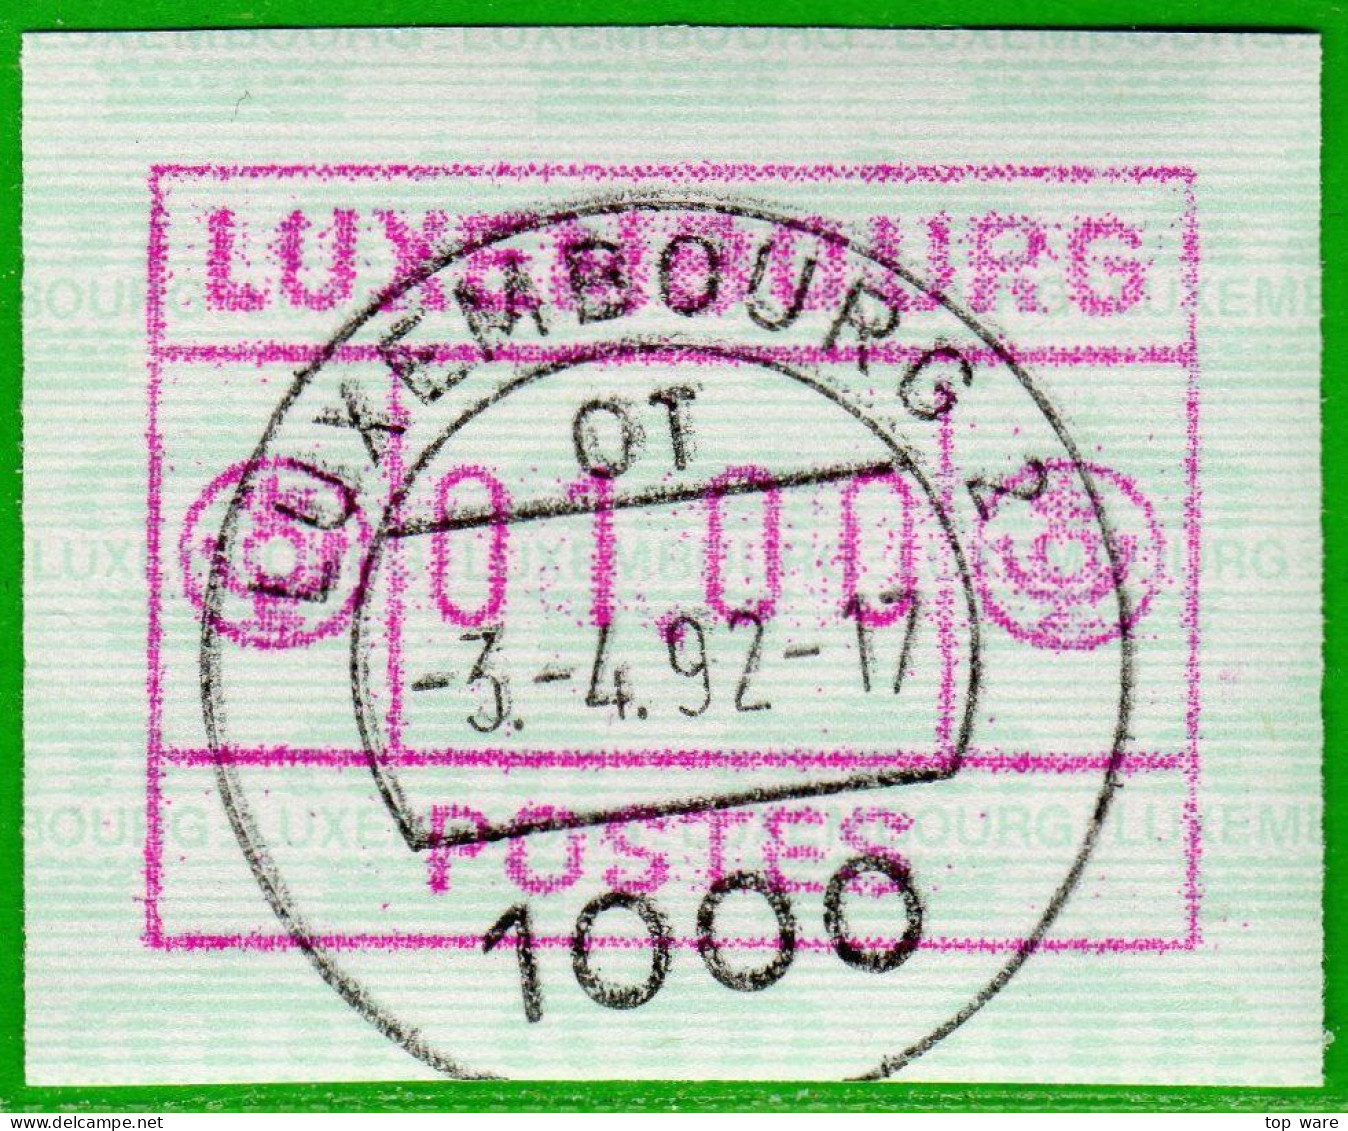 Luxemburg Luxembourg Timbres ATM  2 D Kleines Postes Rotlila / 01.00 Tages-O 3.4.1992 / Frama Automatenmarken - Postage Labels